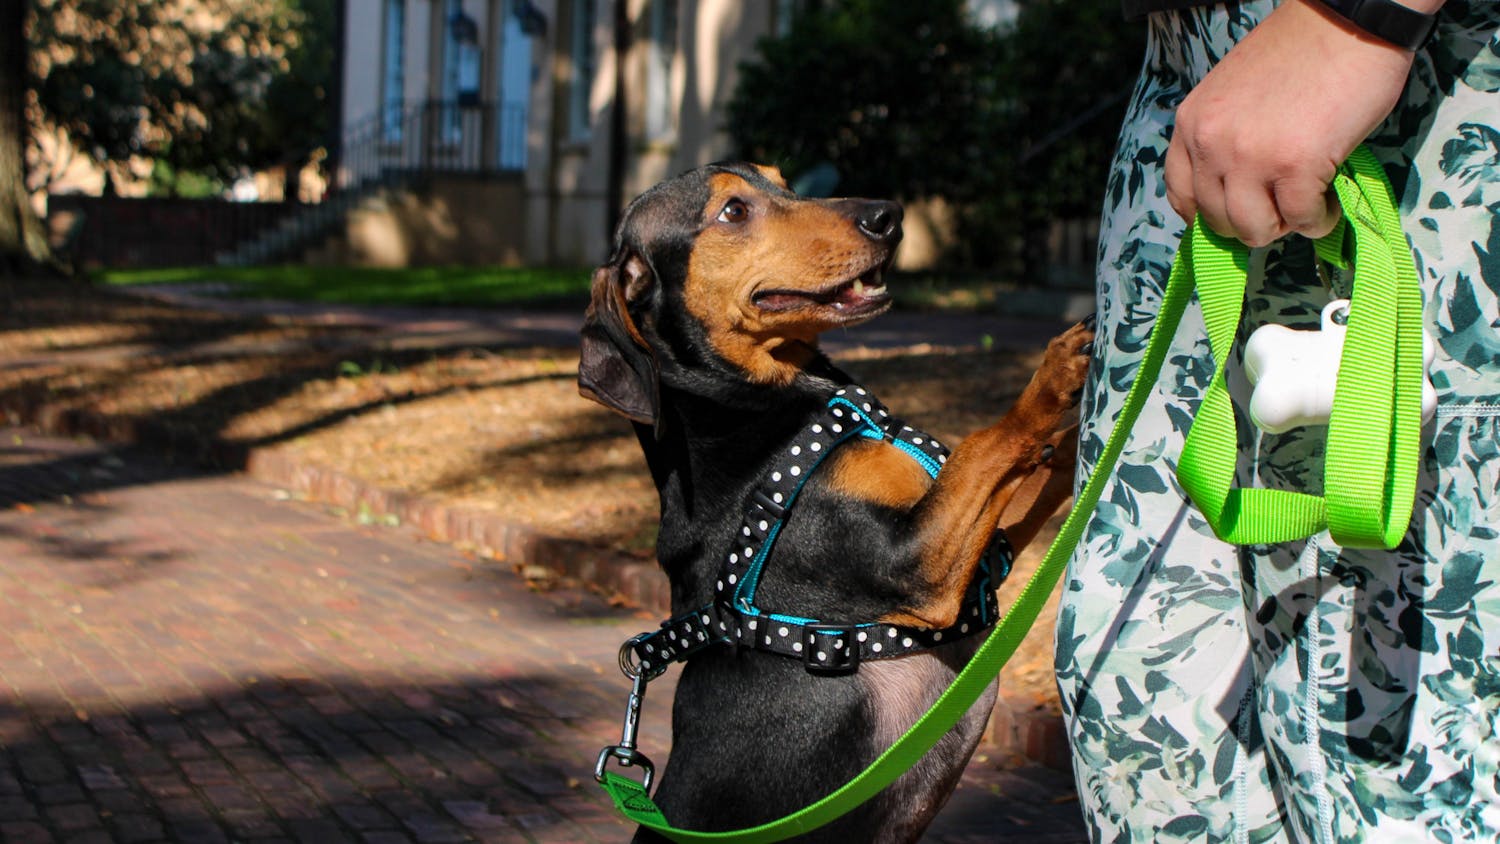 A black and brown dachshund greets its owner during a community dachshund walk held by Dachshunds of Columbia on Sept. 17, 2022. The Columbia dog-walking group gathered with their furry friends for a walk through USC's Horseshoe on Saturday morning.